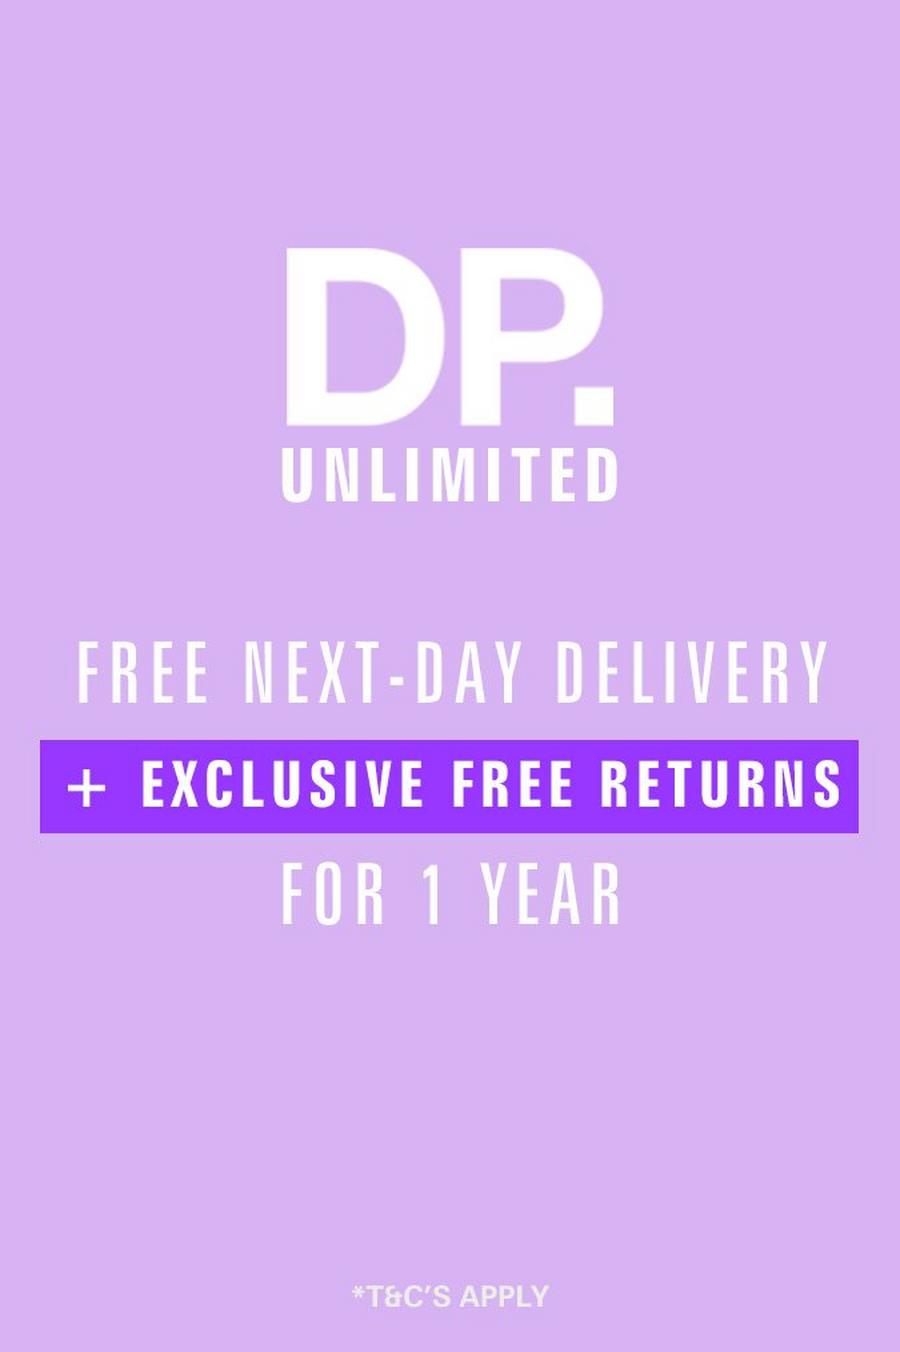 UNLIMITED NEXT DAY DELIVERY